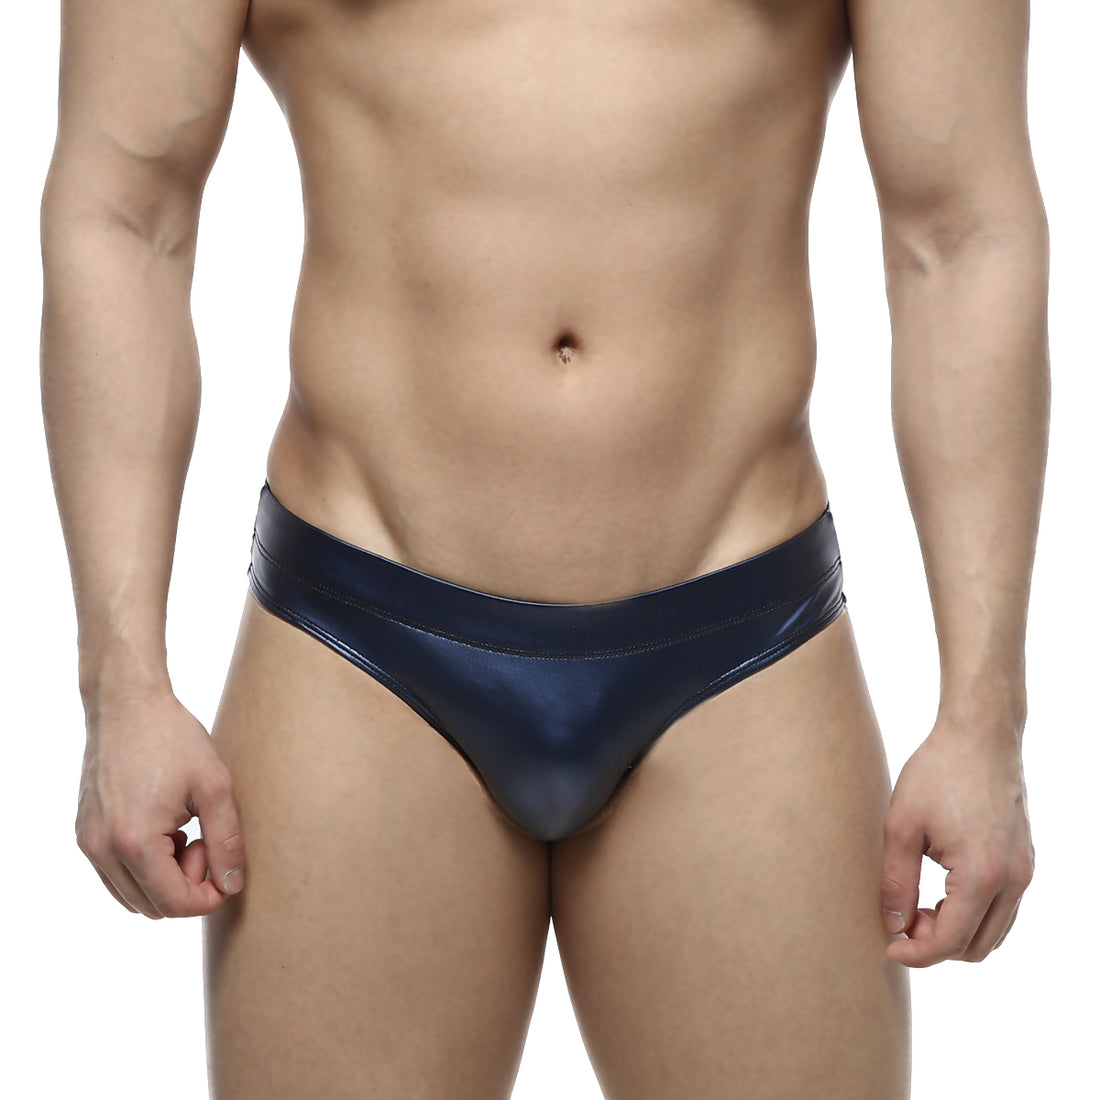 [MetroMuscleWear] Basic Competition Suit Navy (4974-70) 